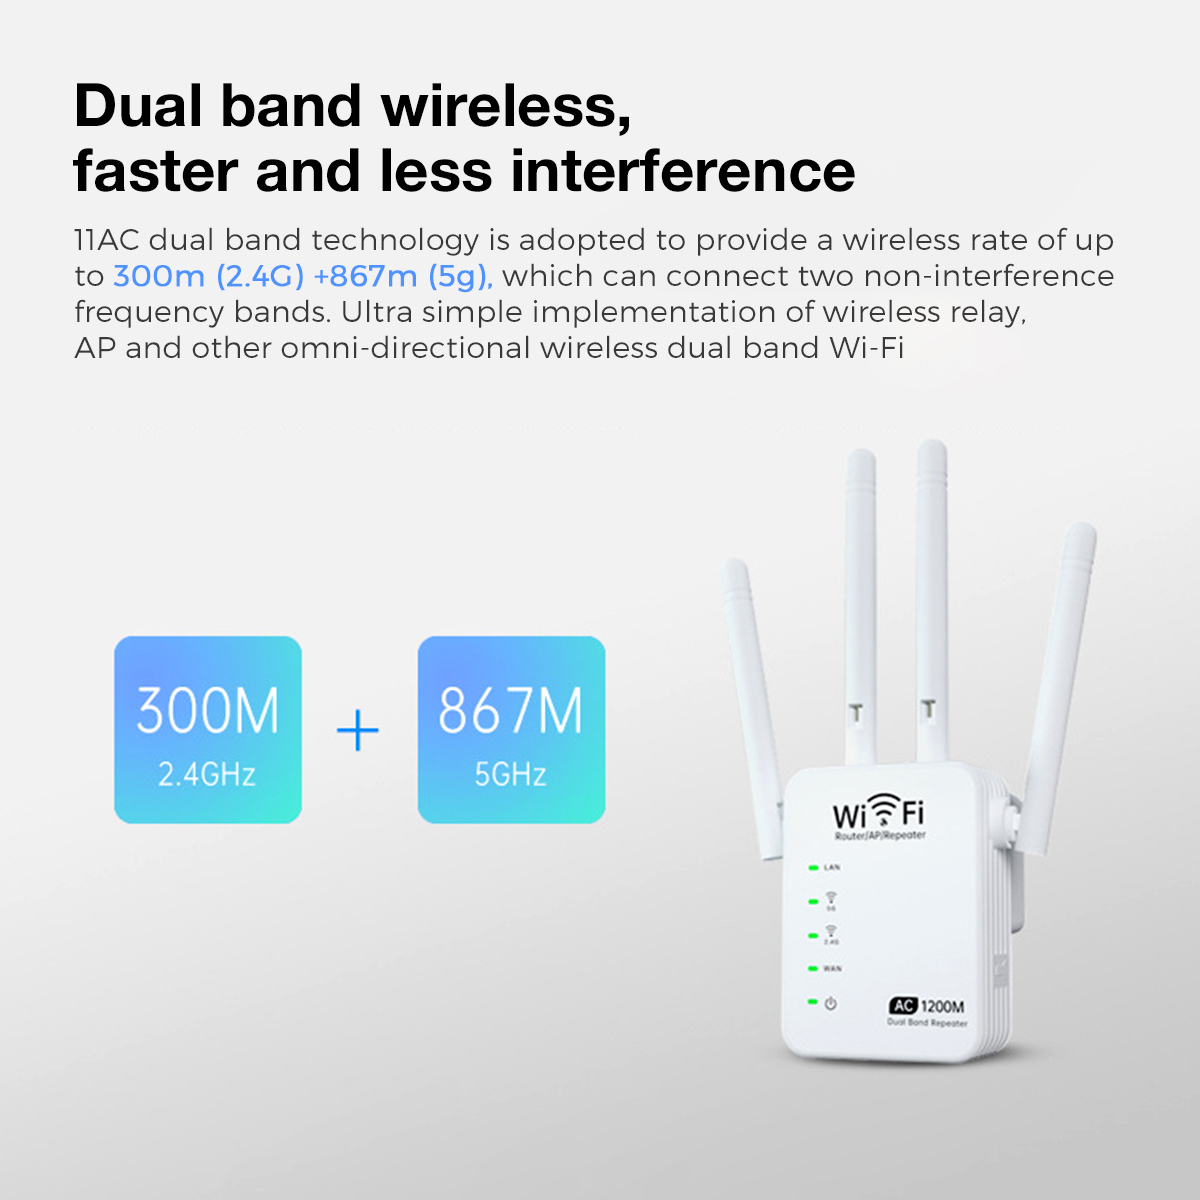 1200Mbps Repeater Wifi Amplifier 5G/2.4ghz Gigabit Router Extender Booster Repeater WiFi Range Extender Signal Home Office